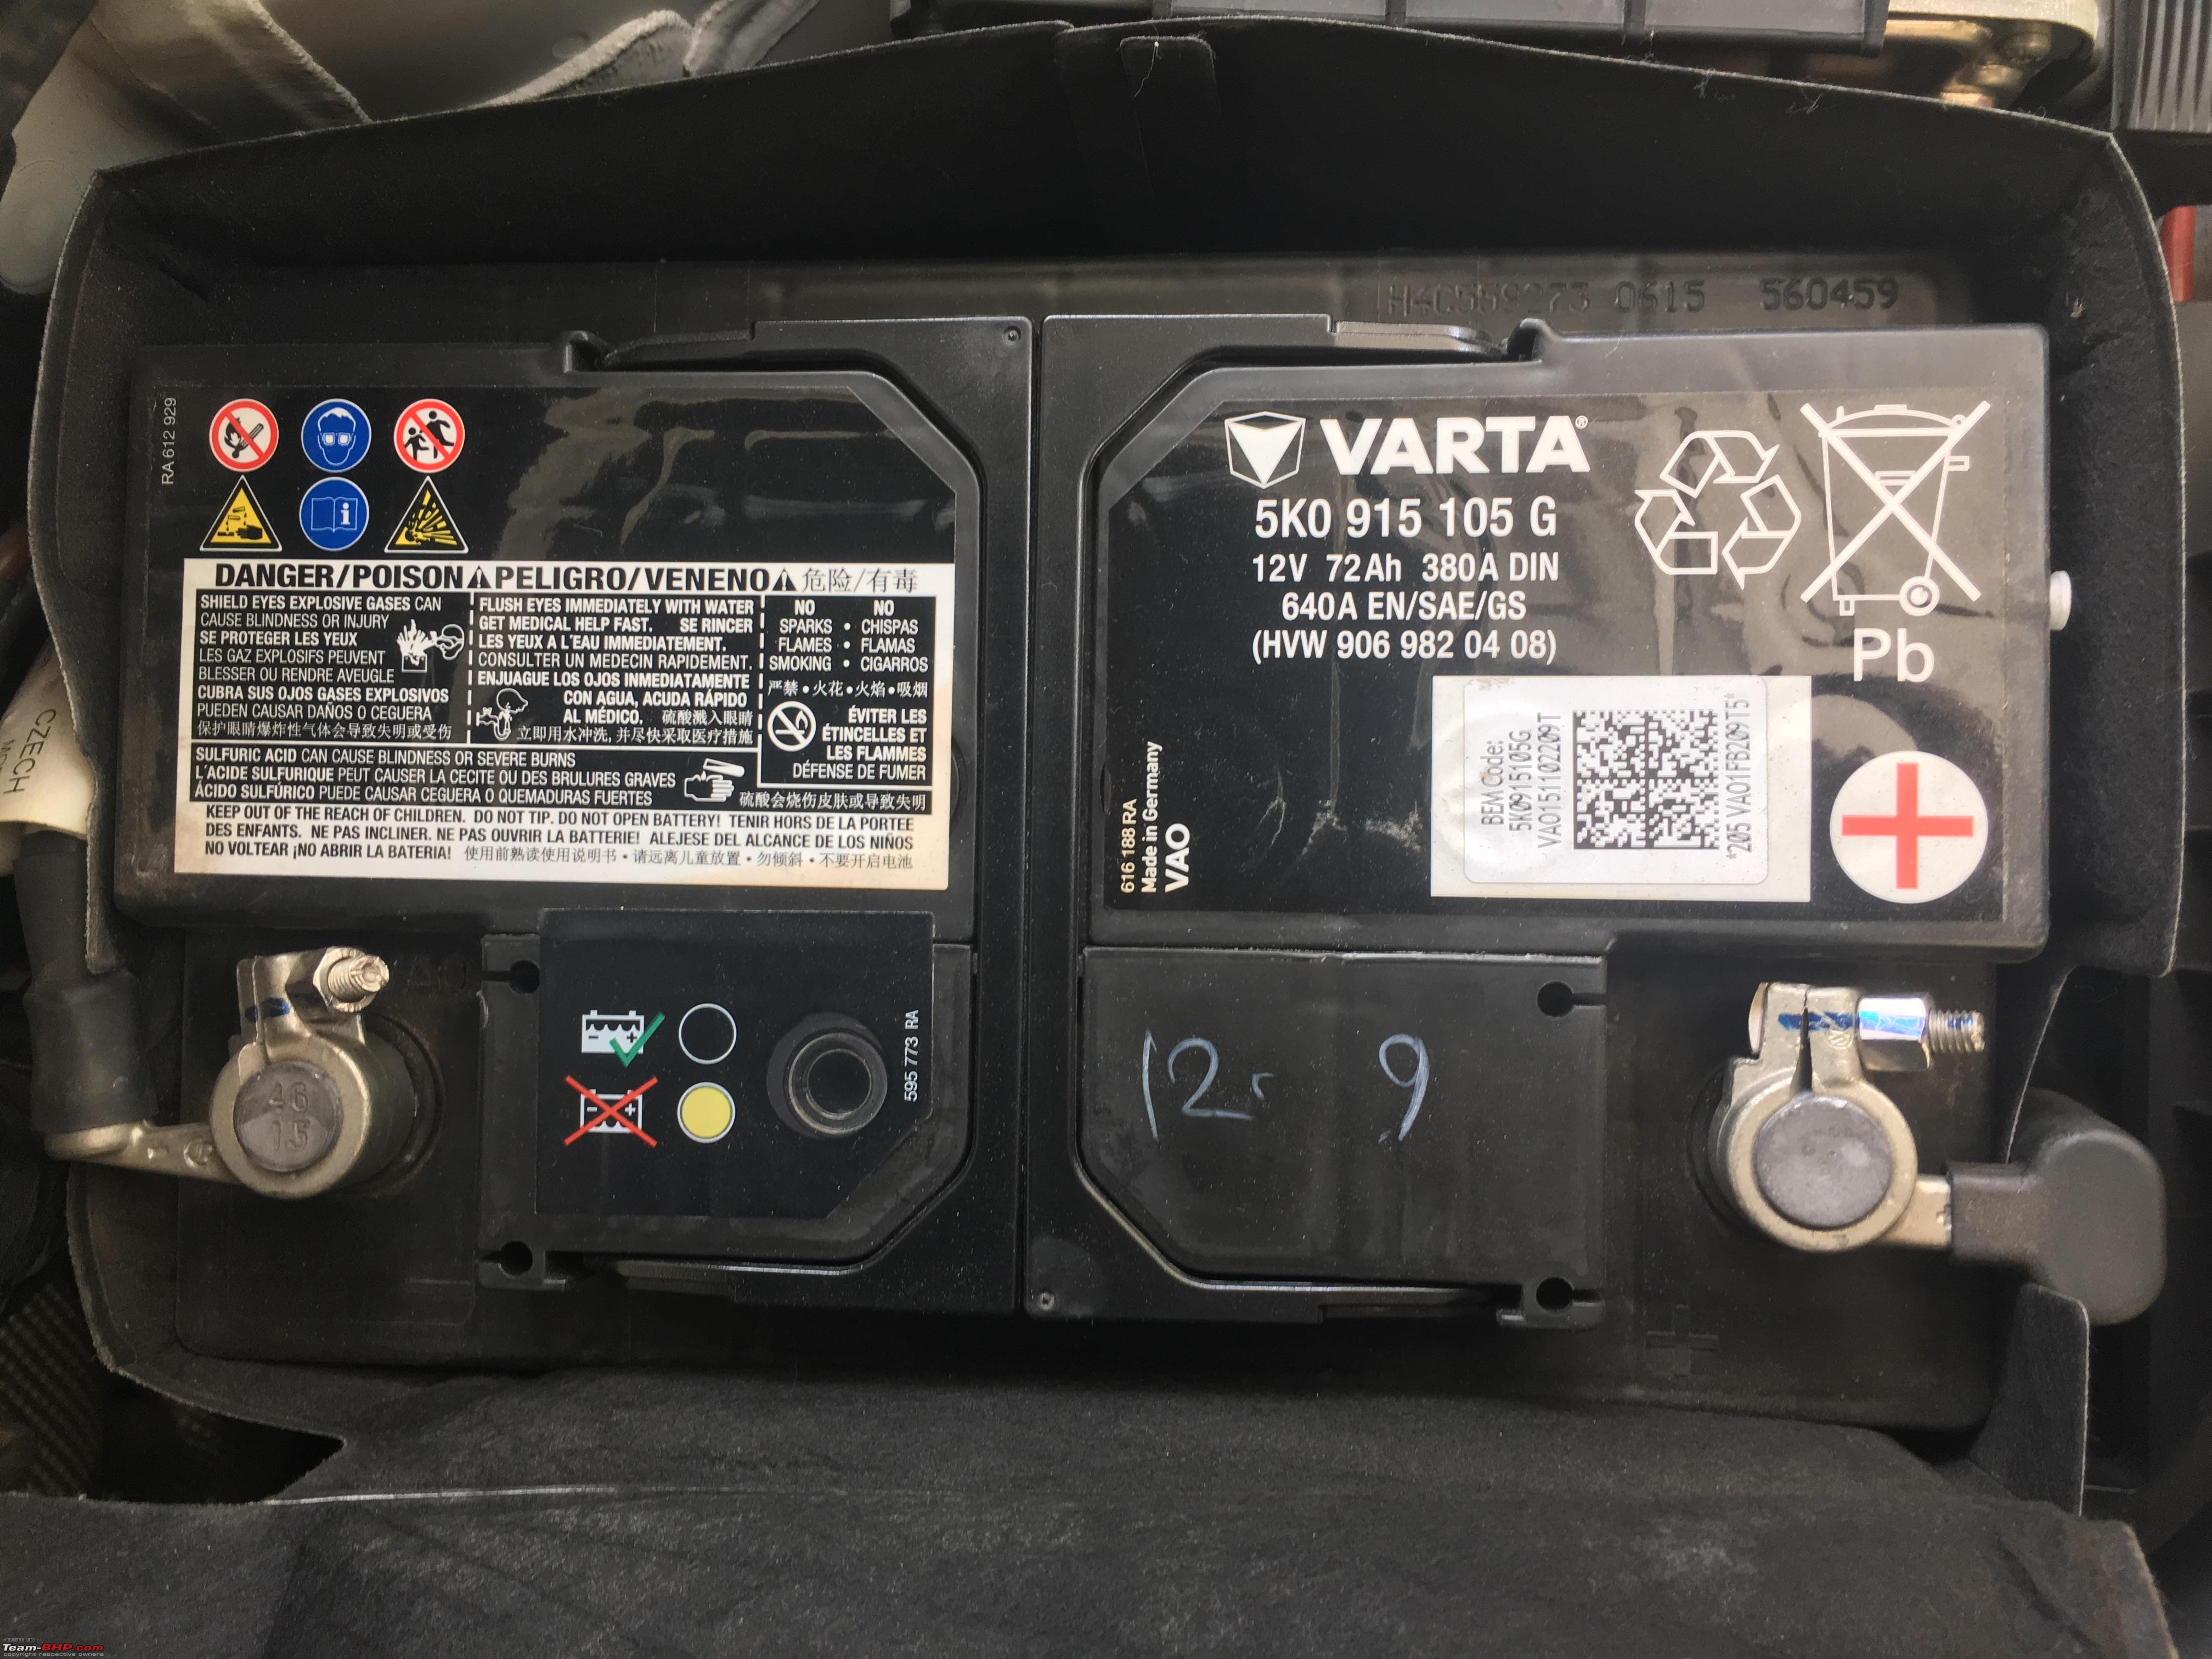 Replacement battery for my Audi A3: Do specifications have to